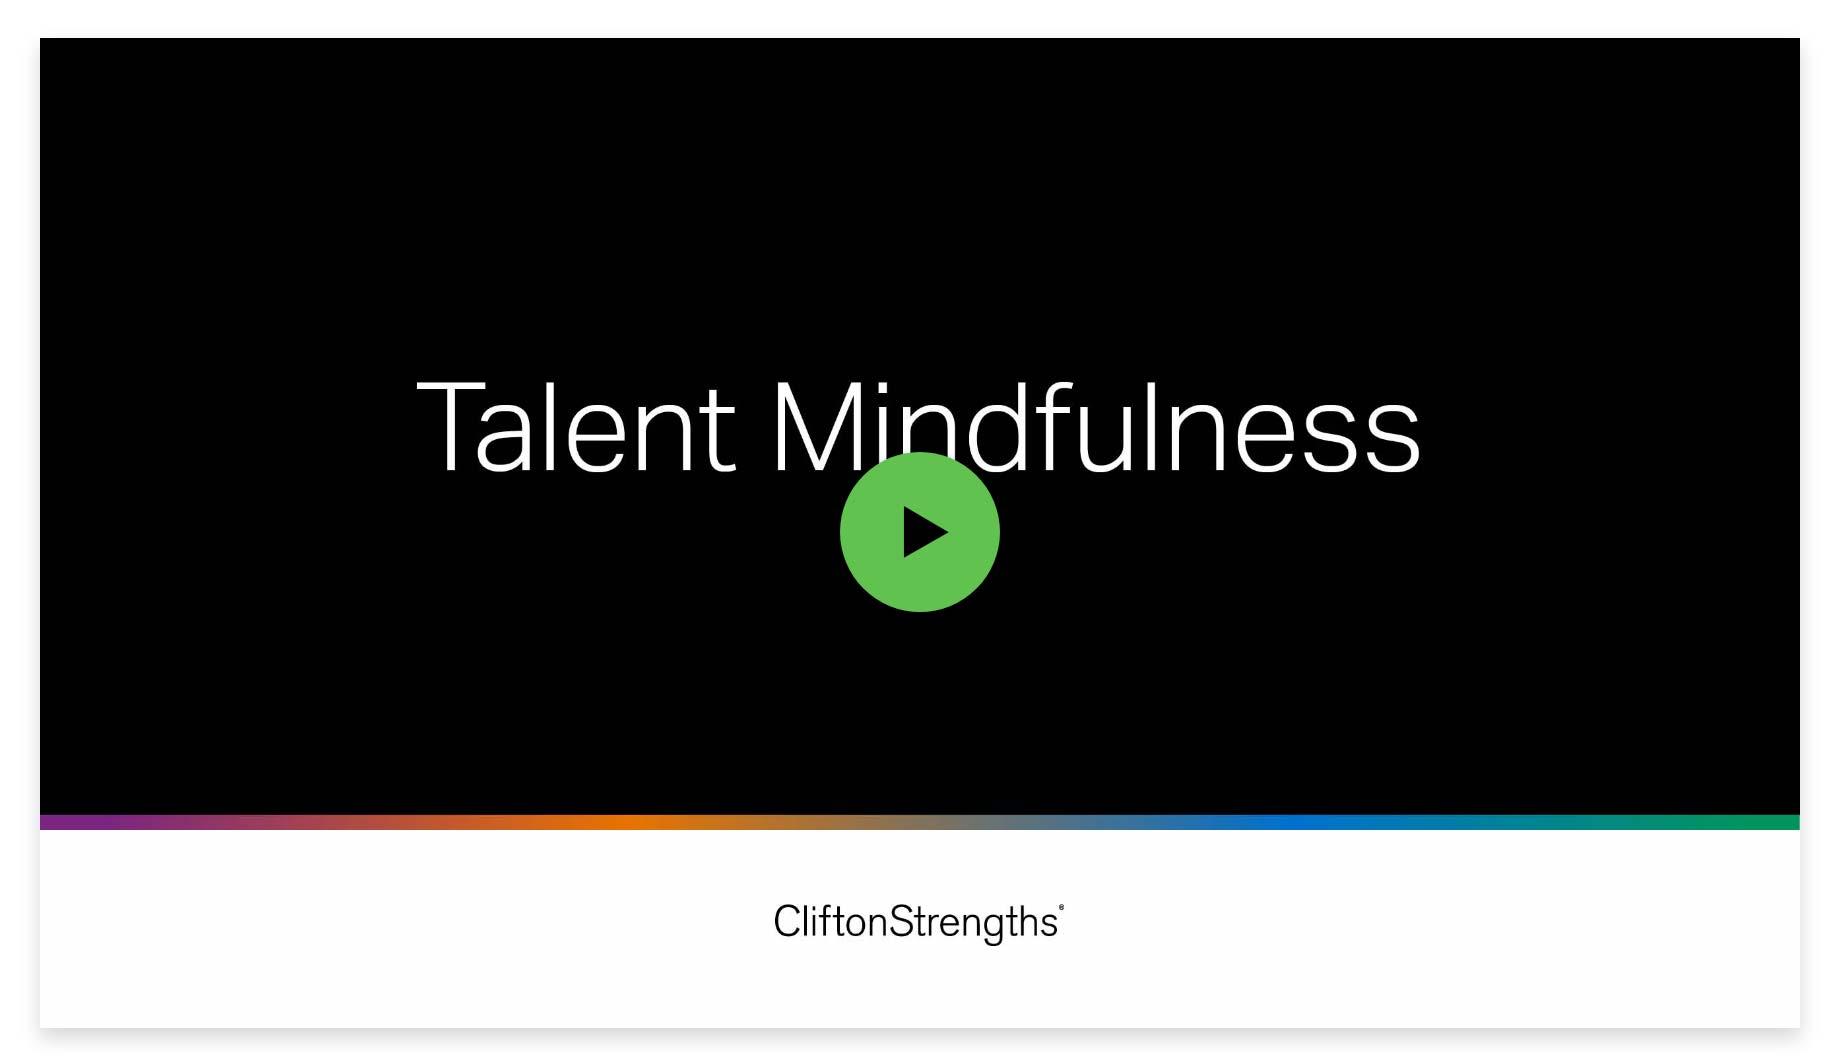 Play video: Gallup Talent Mindfulness: The Trailer